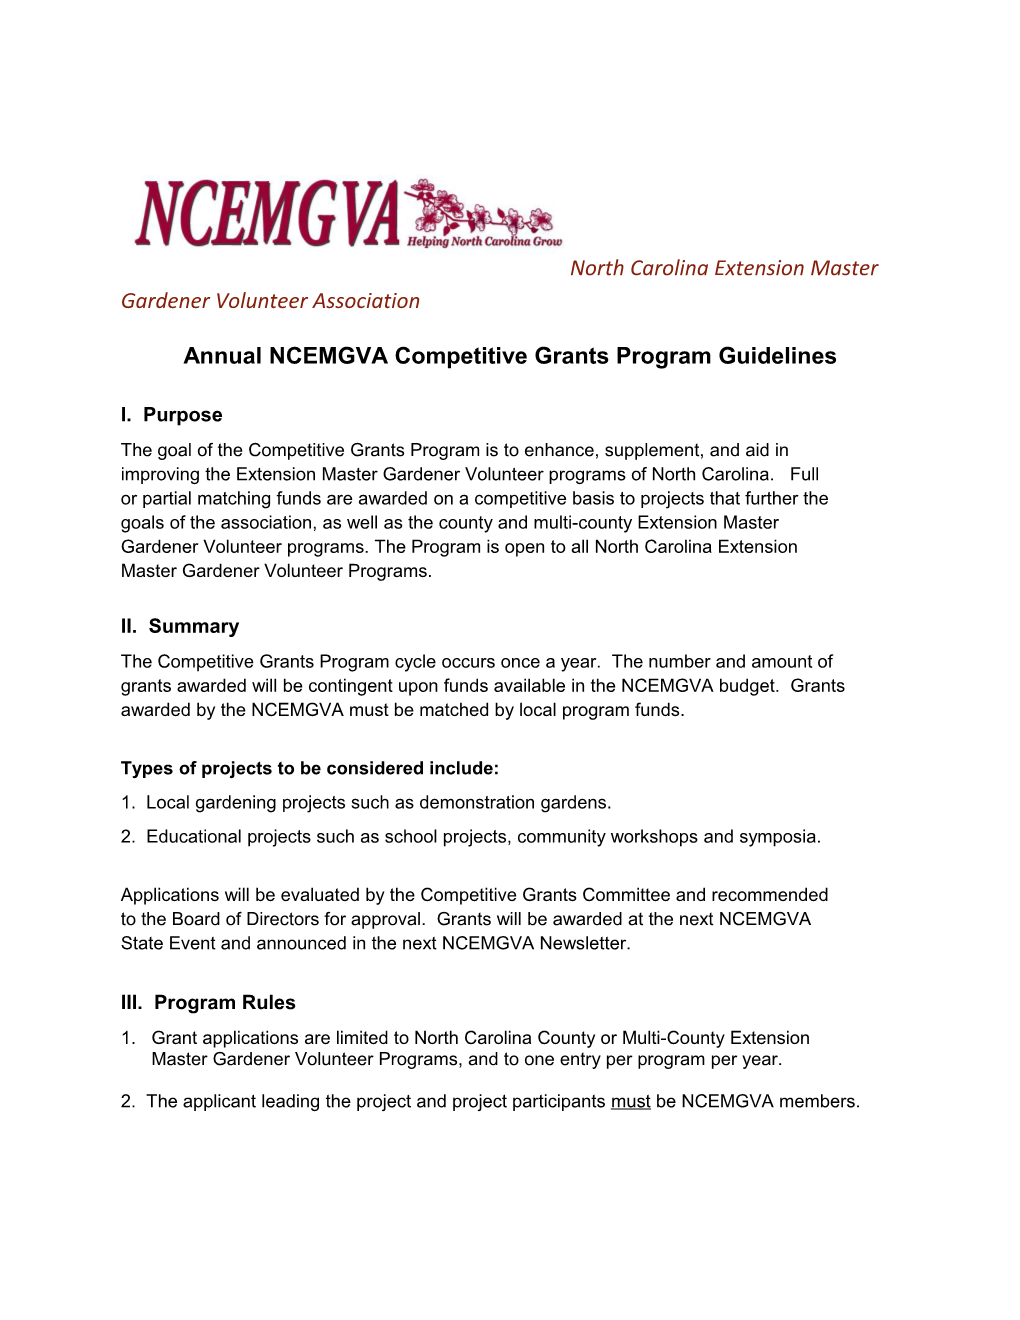 Annual NCEMGVA Competitive Grants Program Guidelines